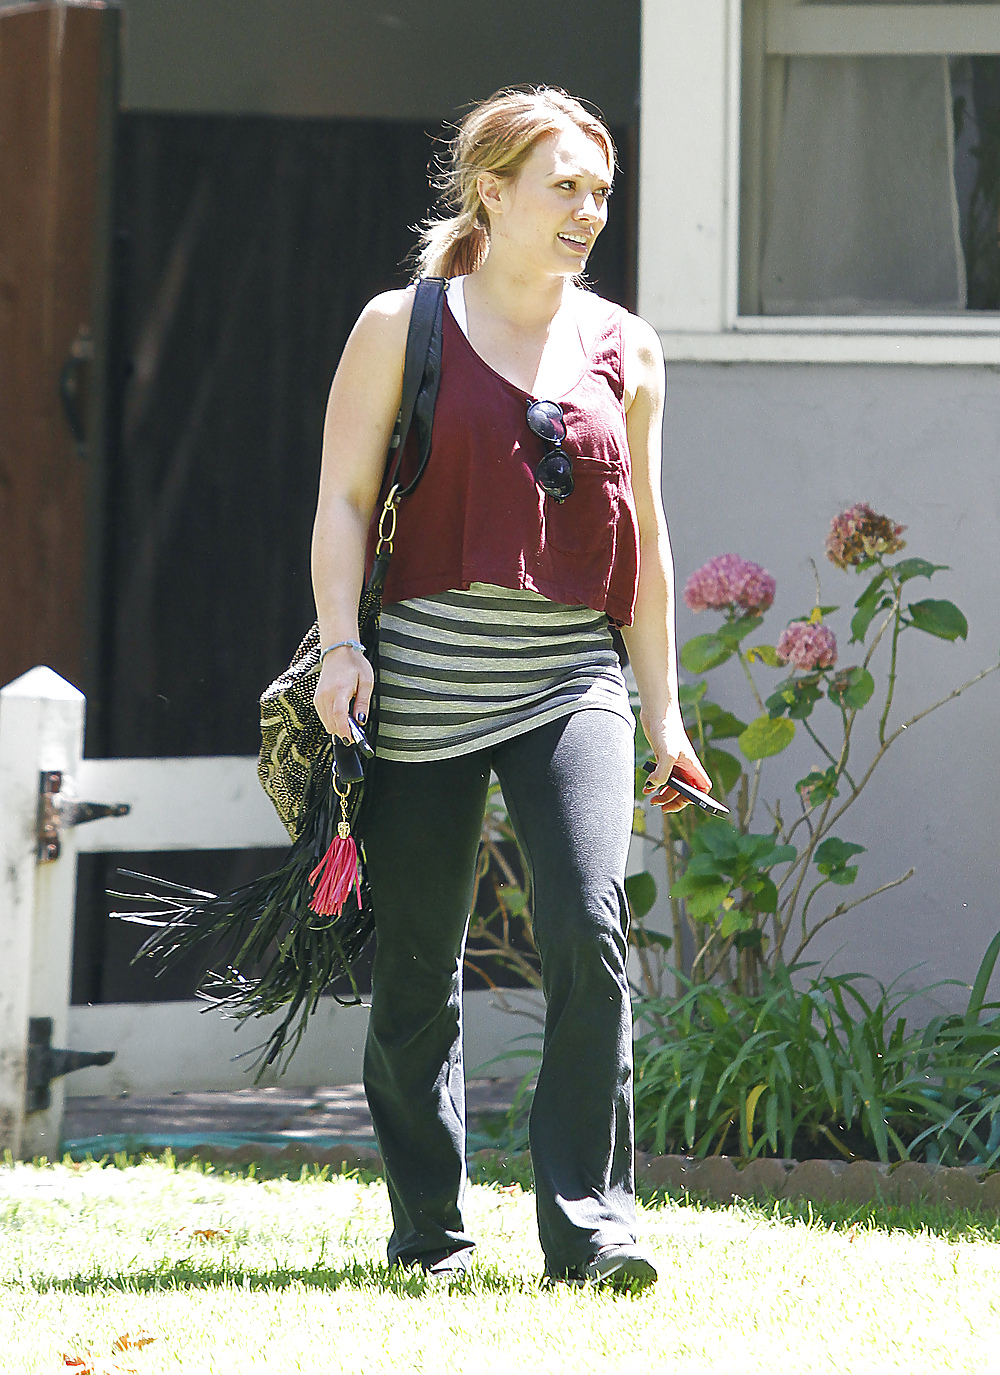 Hilary Duff Goes To Yoga Class Looking Happy Hollywood #7464030